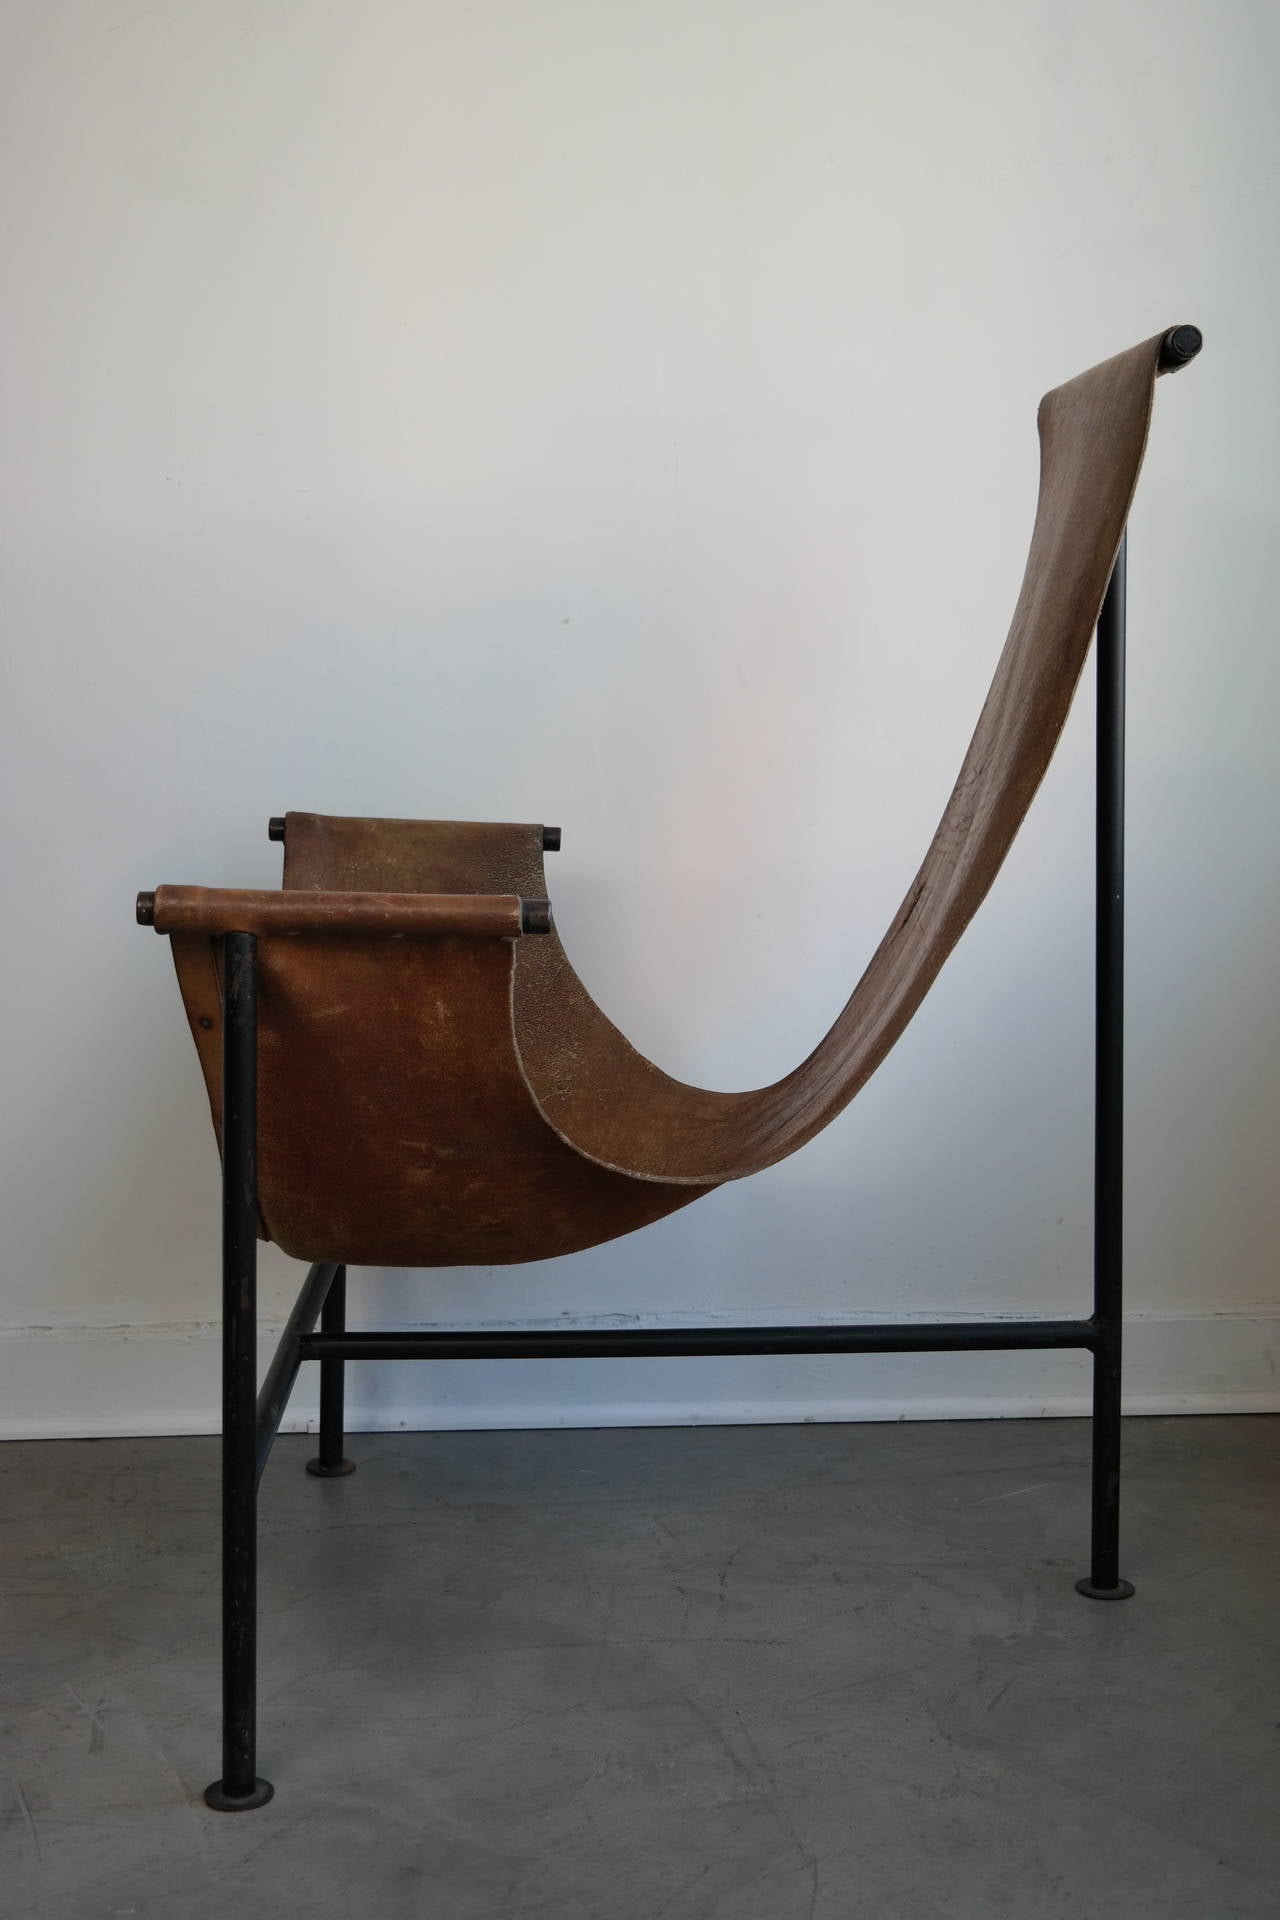 This exceptional sling chair is an early copy of a ''T'' chair by Katavolos, after much research we found a possible attribution to Giorgio Belloli, Marfil Guanajuato, 1940s. Mexican Modernism at its best. Leather shows great patina with the